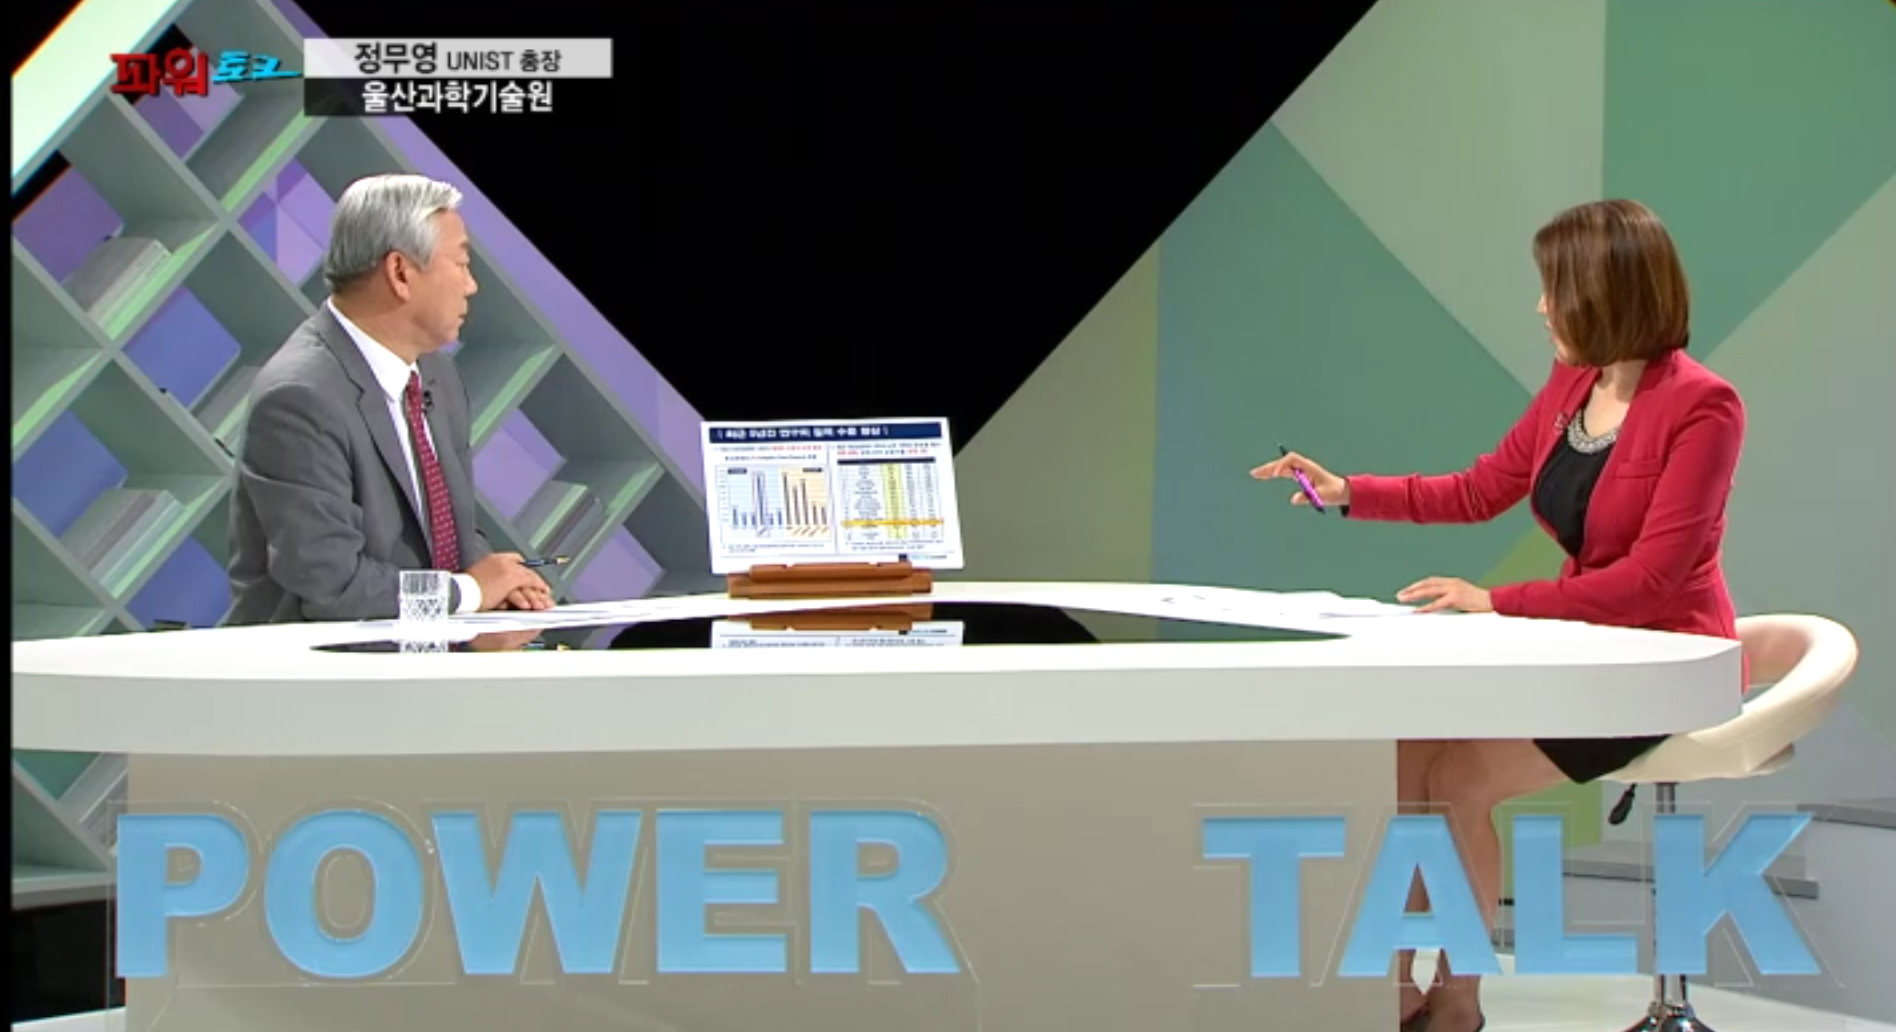 President Mooyoung Jung Appears on KNN Power Talk